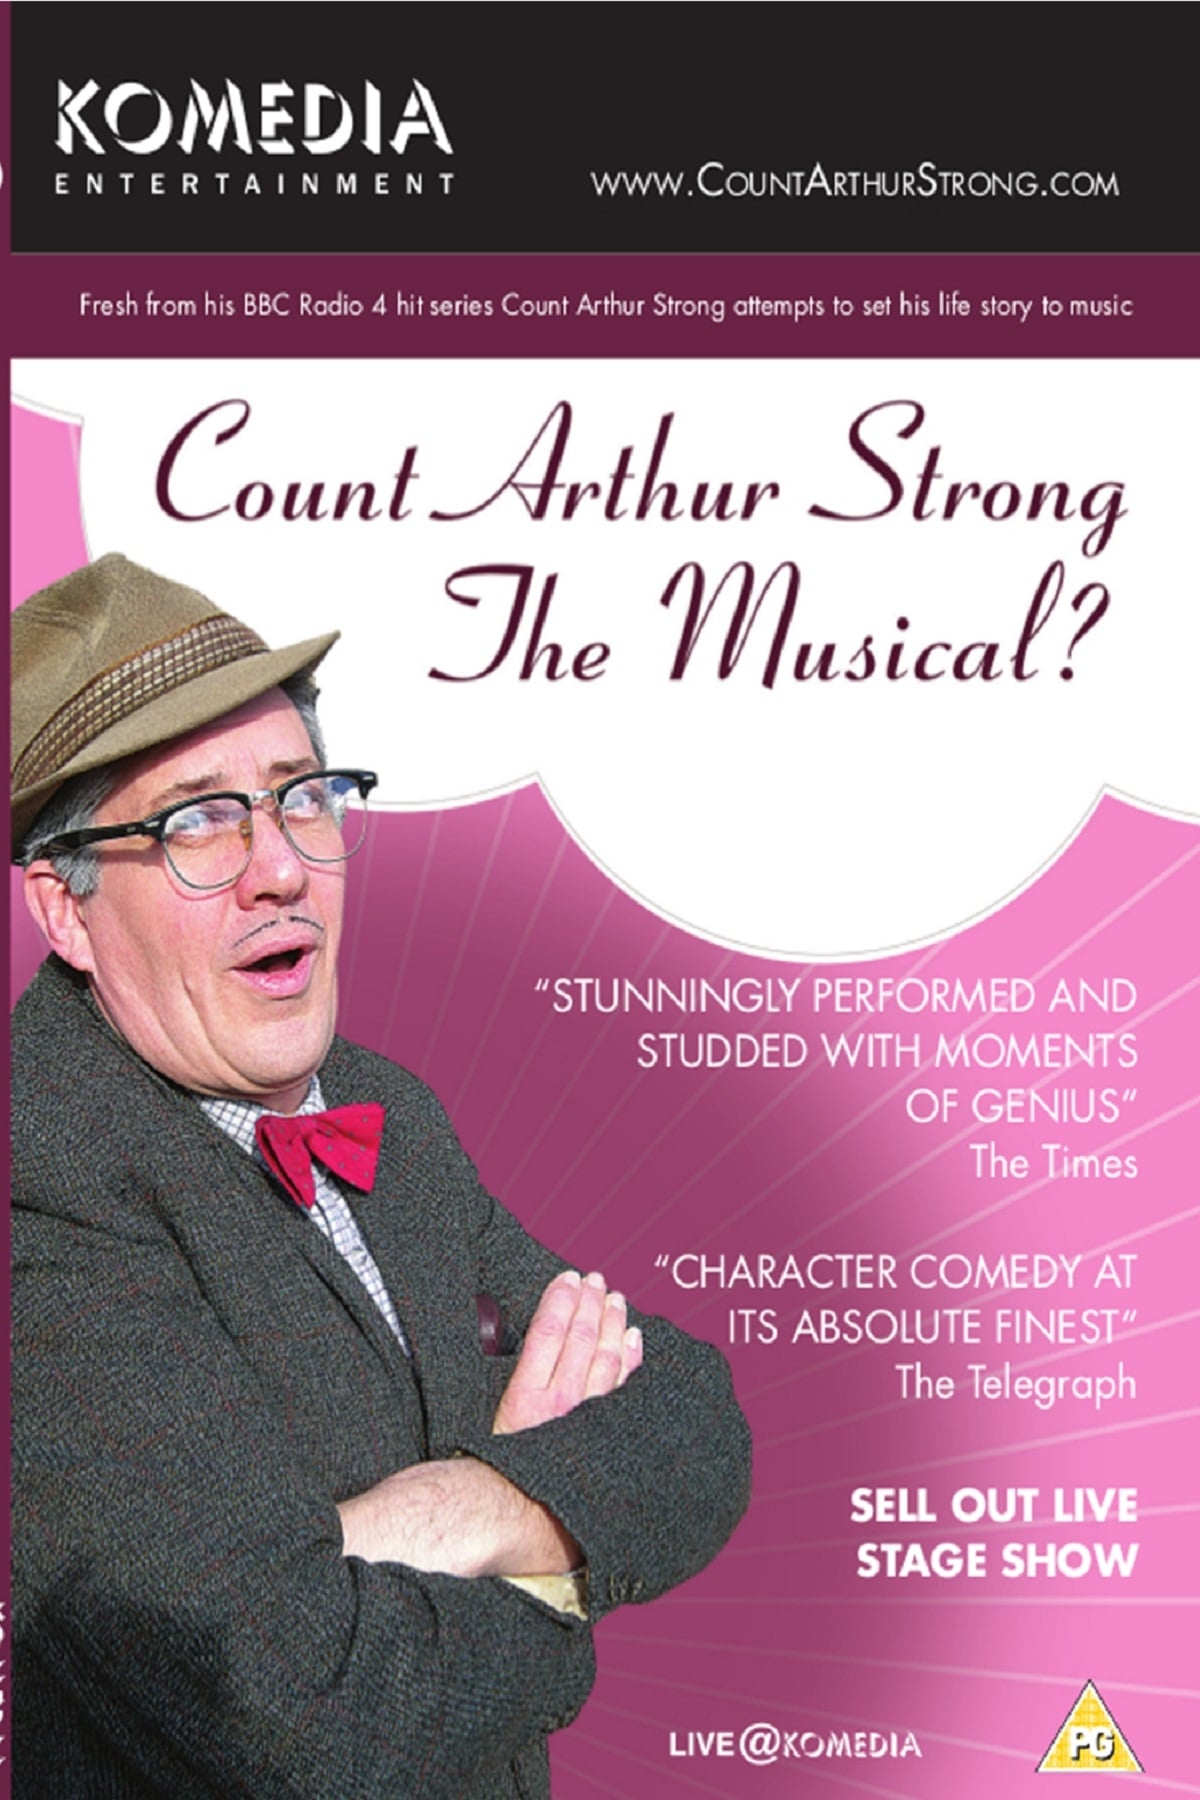 Count Arthur Strong The Musical?